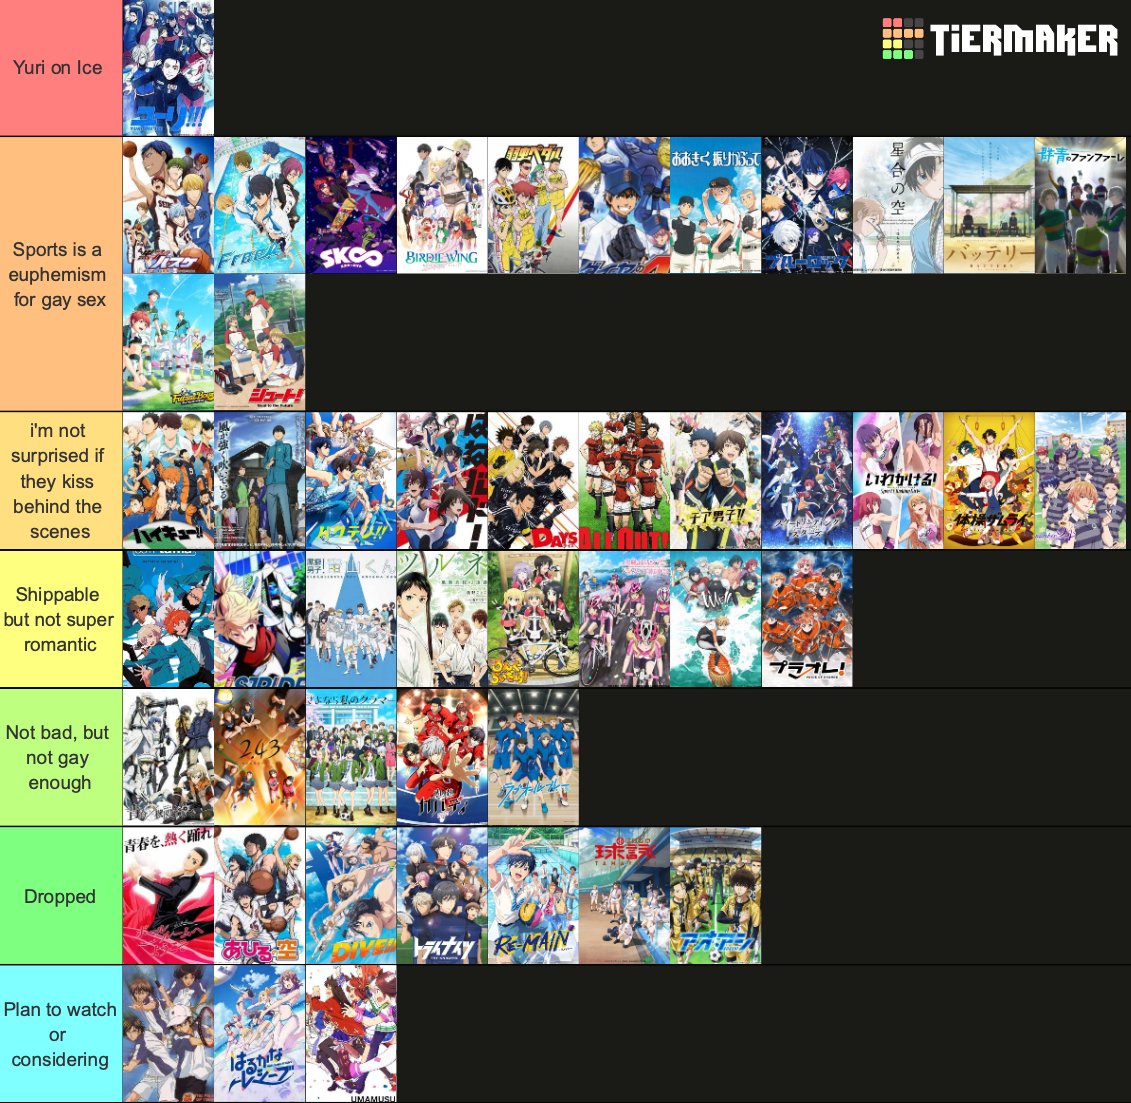 Sports Anime tier list ranked by level of queerness 🏳️‍🌈